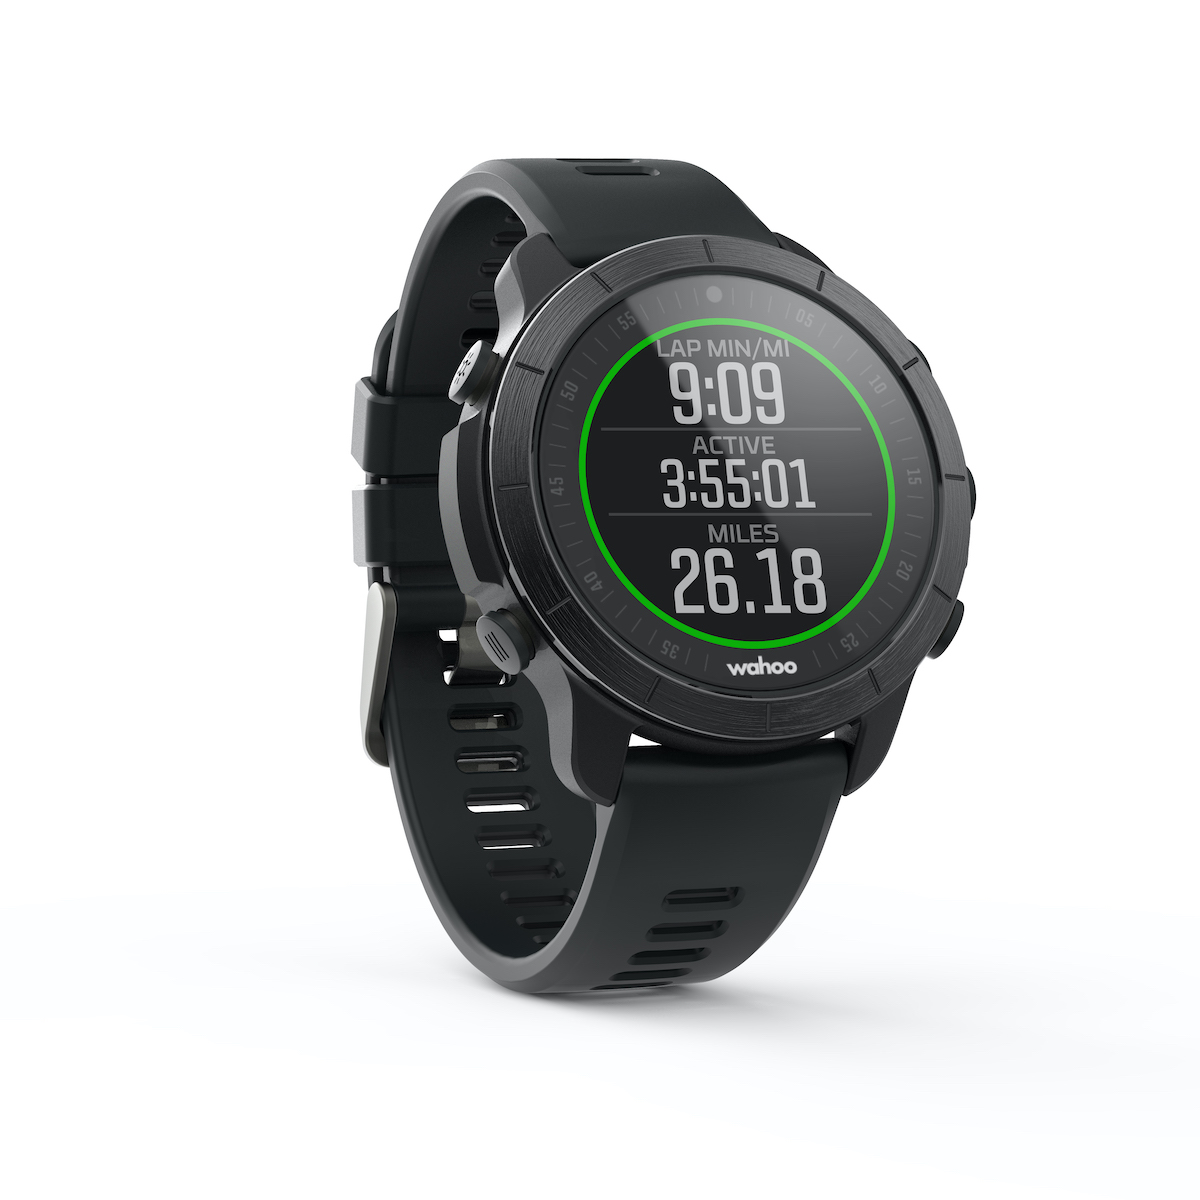 Wahoo_ELEMNT-RIVAL-Stealth-Grey_WF140BK_FrontRight_WorkoutRunning